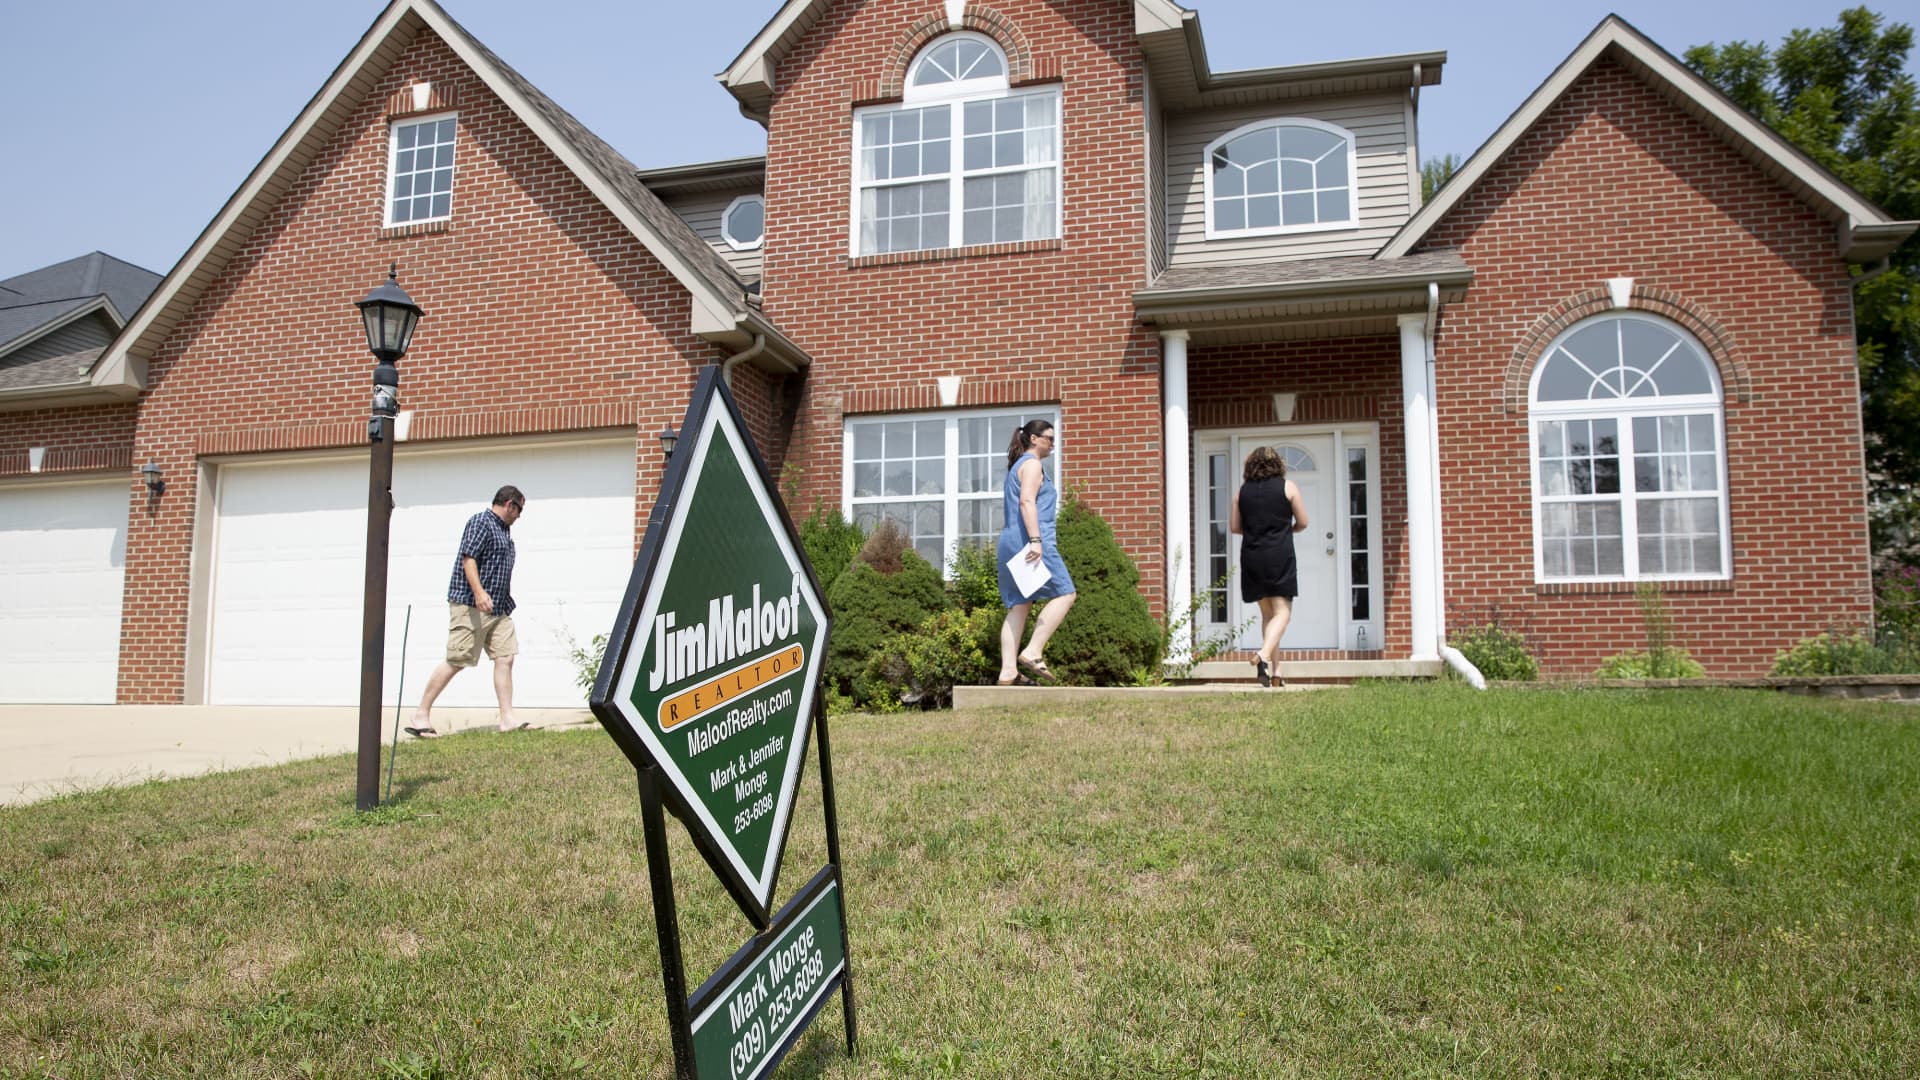 Mortgage refinance demand plunges 14% as interest rates spike higher – CNBC